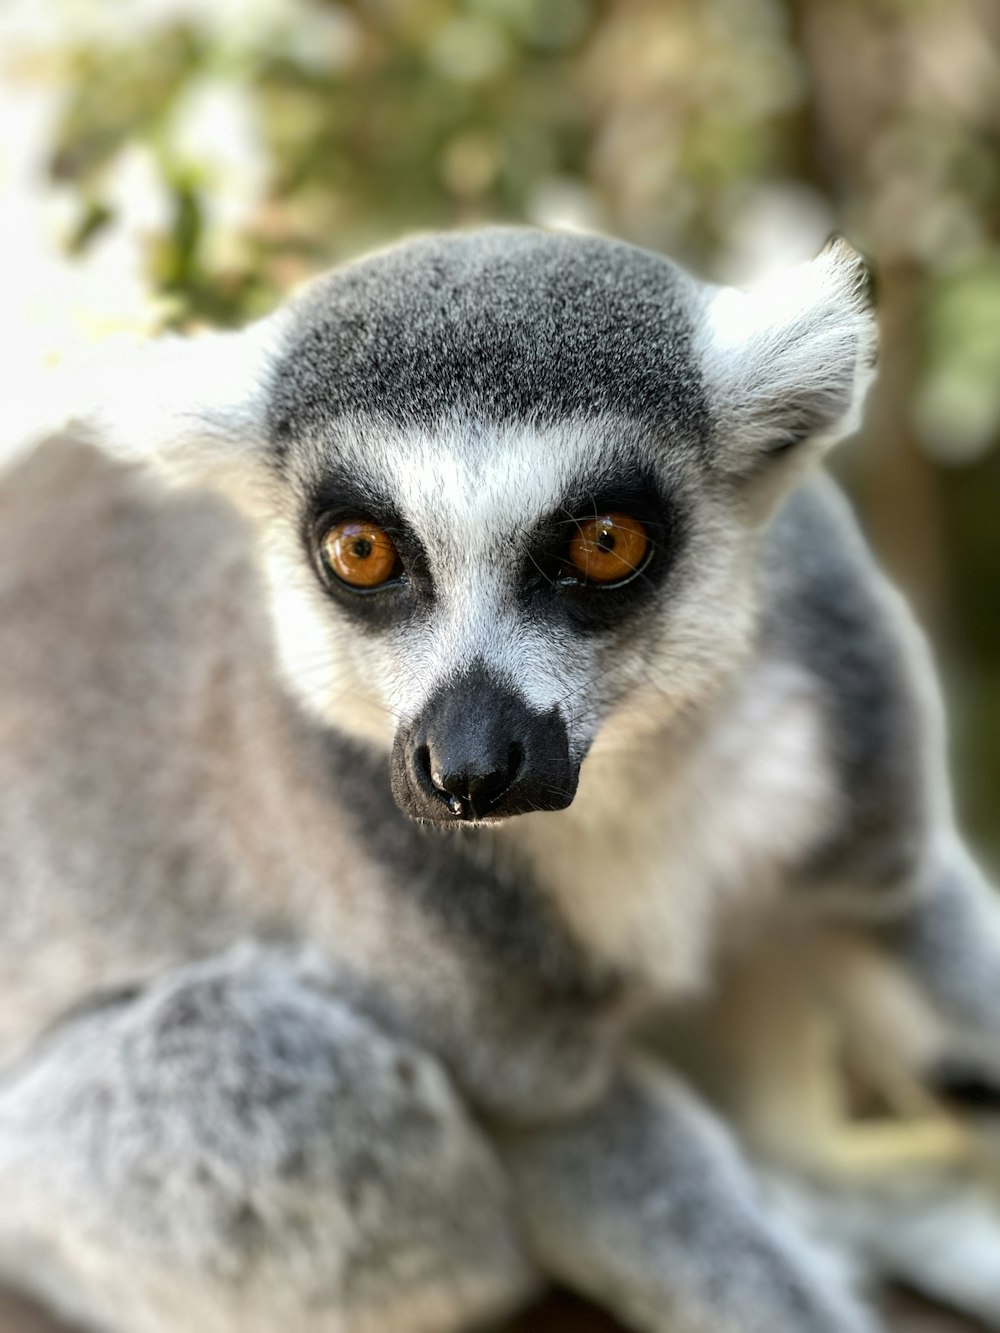 gray and white lemur on green leaves